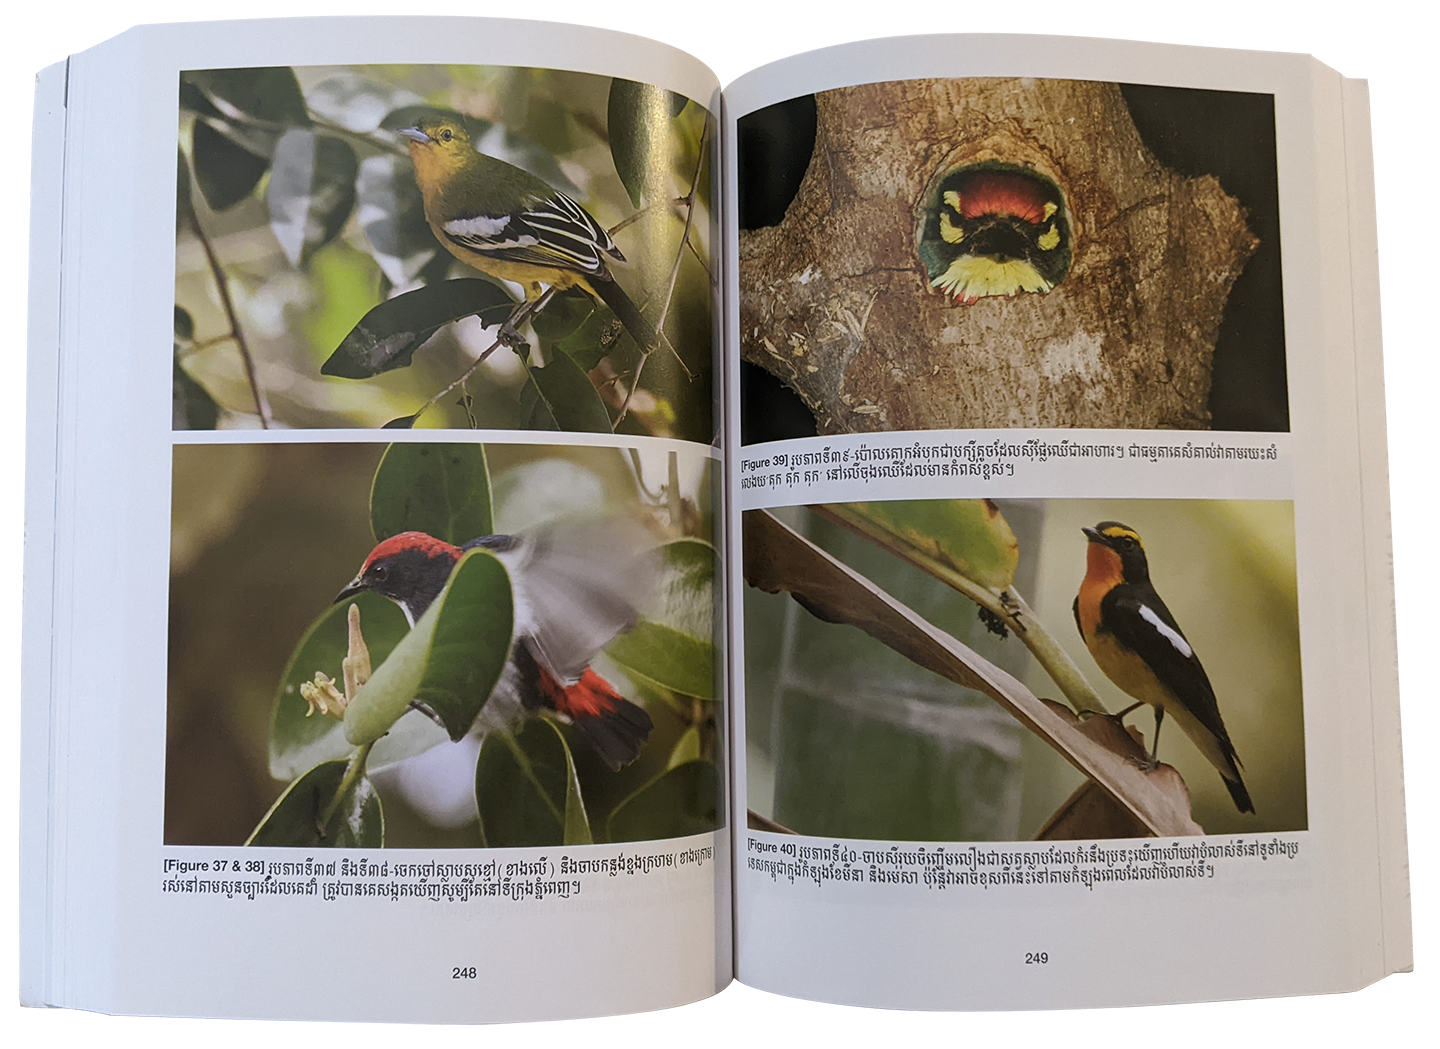 The Birds of Cambodia : An Annotated Checklist